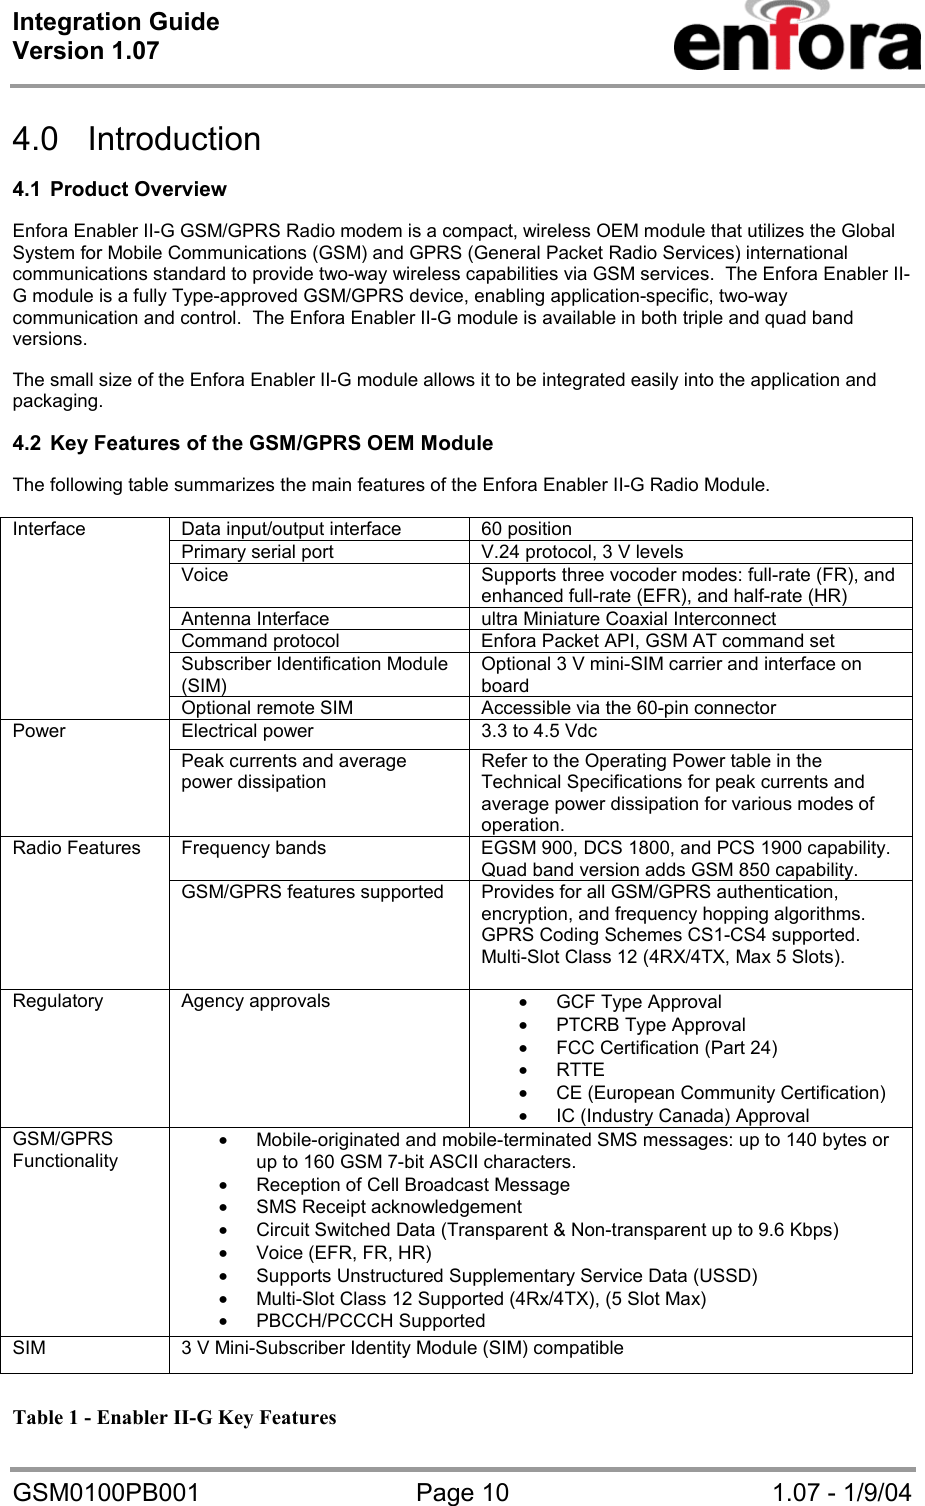 Integration Guide  Version 1.07   GSM0100PB001  Page 10  1.07 - 1/9/04  4.0 Introduction  4.1 Product Overview  Enfora Enabler II-G GSM/GPRS Radio modem is a compact, wireless OEM module that utilizes the Global System for Mobile Communications (GSM) and GPRS (General Packet Radio Services) international communications standard to provide two-way wireless capabilities via GSM services.  The Enfora Enabler II-G module is a fully Type-approved GSM/GPRS device, enabling application-specific, two-way communication and control.  The Enfora Enabler II-G module is available in both triple and quad band versions.  The small size of the Enfora Enabler II-G module allows it to be integrated easily into the application and packaging.  4.2  Key Features of the GSM/GPRS OEM Module  The following table summarizes the main features of the Enfora Enabler II-G Radio Module.  Data input/output interface  60 position Primary serial port  V.24 protocol, 3 V levels Voice  Supports three vocoder modes: full-rate (FR), and enhanced full-rate (EFR), and half-rate (HR) Antenna Interface  ultra Miniature Coaxial Interconnect Command protocol  Enfora Packet API, GSM AT command set Subscriber Identification Module (SIM) Optional 3 V mini-SIM carrier and interface on board Interface Optional remote SIM  Accessible via the 60-pin connector Electrical power  3.3 to 4.5 Vdc Power   Peak currents and average power dissipation Refer to the Operating Power table in the Technical Specifications for peak currents and average power dissipation for various modes of operation. Frequency bands  EGSM 900, DCS 1800, and PCS 1900 capability.  Quad band version adds GSM 850 capability. Radio Features GSM/GPRS features supported  Provides for all GSM/GPRS authentication, encryption, and frequency hopping algorithms.  GPRS Coding Schemes CS1-CS4 supported.  Multi-Slot Class 12 (4RX/4TX, Max 5 Slots).  Regulatory Agency approvals  • GCF Type Approval • PTCRB Type Approval • FCC Certification (Part 24) • RTTE • CE (European Community Certification) • IC (Industry Canada) Approval GSM/GPRS Functionality • Mobile-originated and mobile-terminated SMS messages: up to 140 bytes or up to 160 GSM 7-bit ASCII characters.   • Reception of Cell Broadcast Message • SMS Receipt acknowledgement • Circuit Switched Data (Transparent &amp; Non-transparent up to 9.6 Kbps) • Voice (EFR, FR, HR) • Supports Unstructured Supplementary Service Data (USSD) • Multi-Slot Class 12 Supported (4Rx/4TX), (5 Slot Max) • PBCCH/PCCCH Supported SIM  3 V Mini-Subscriber Identity Module (SIM) compatible  Table 1 - Enabler II-G Key Features 